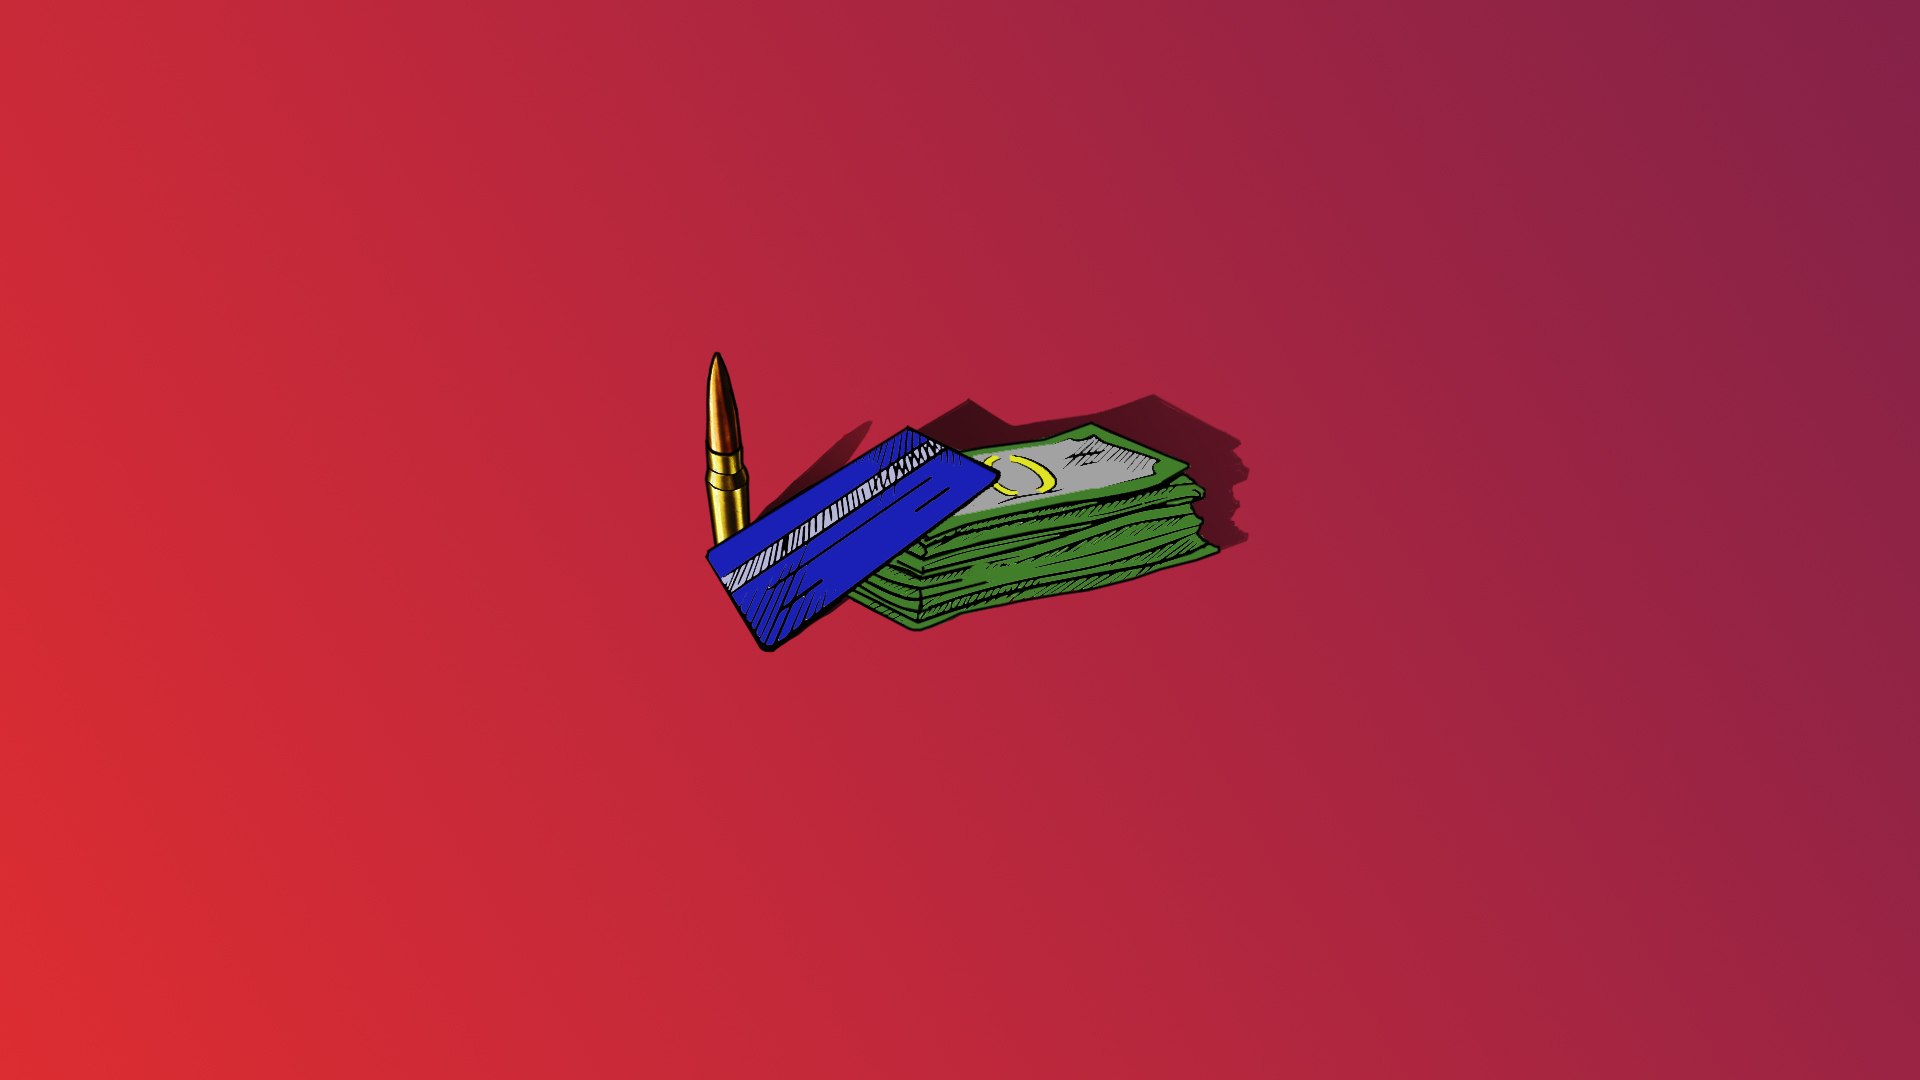 General 1920x1080 cash shell casing credit cards photoshopped minimalism simple background